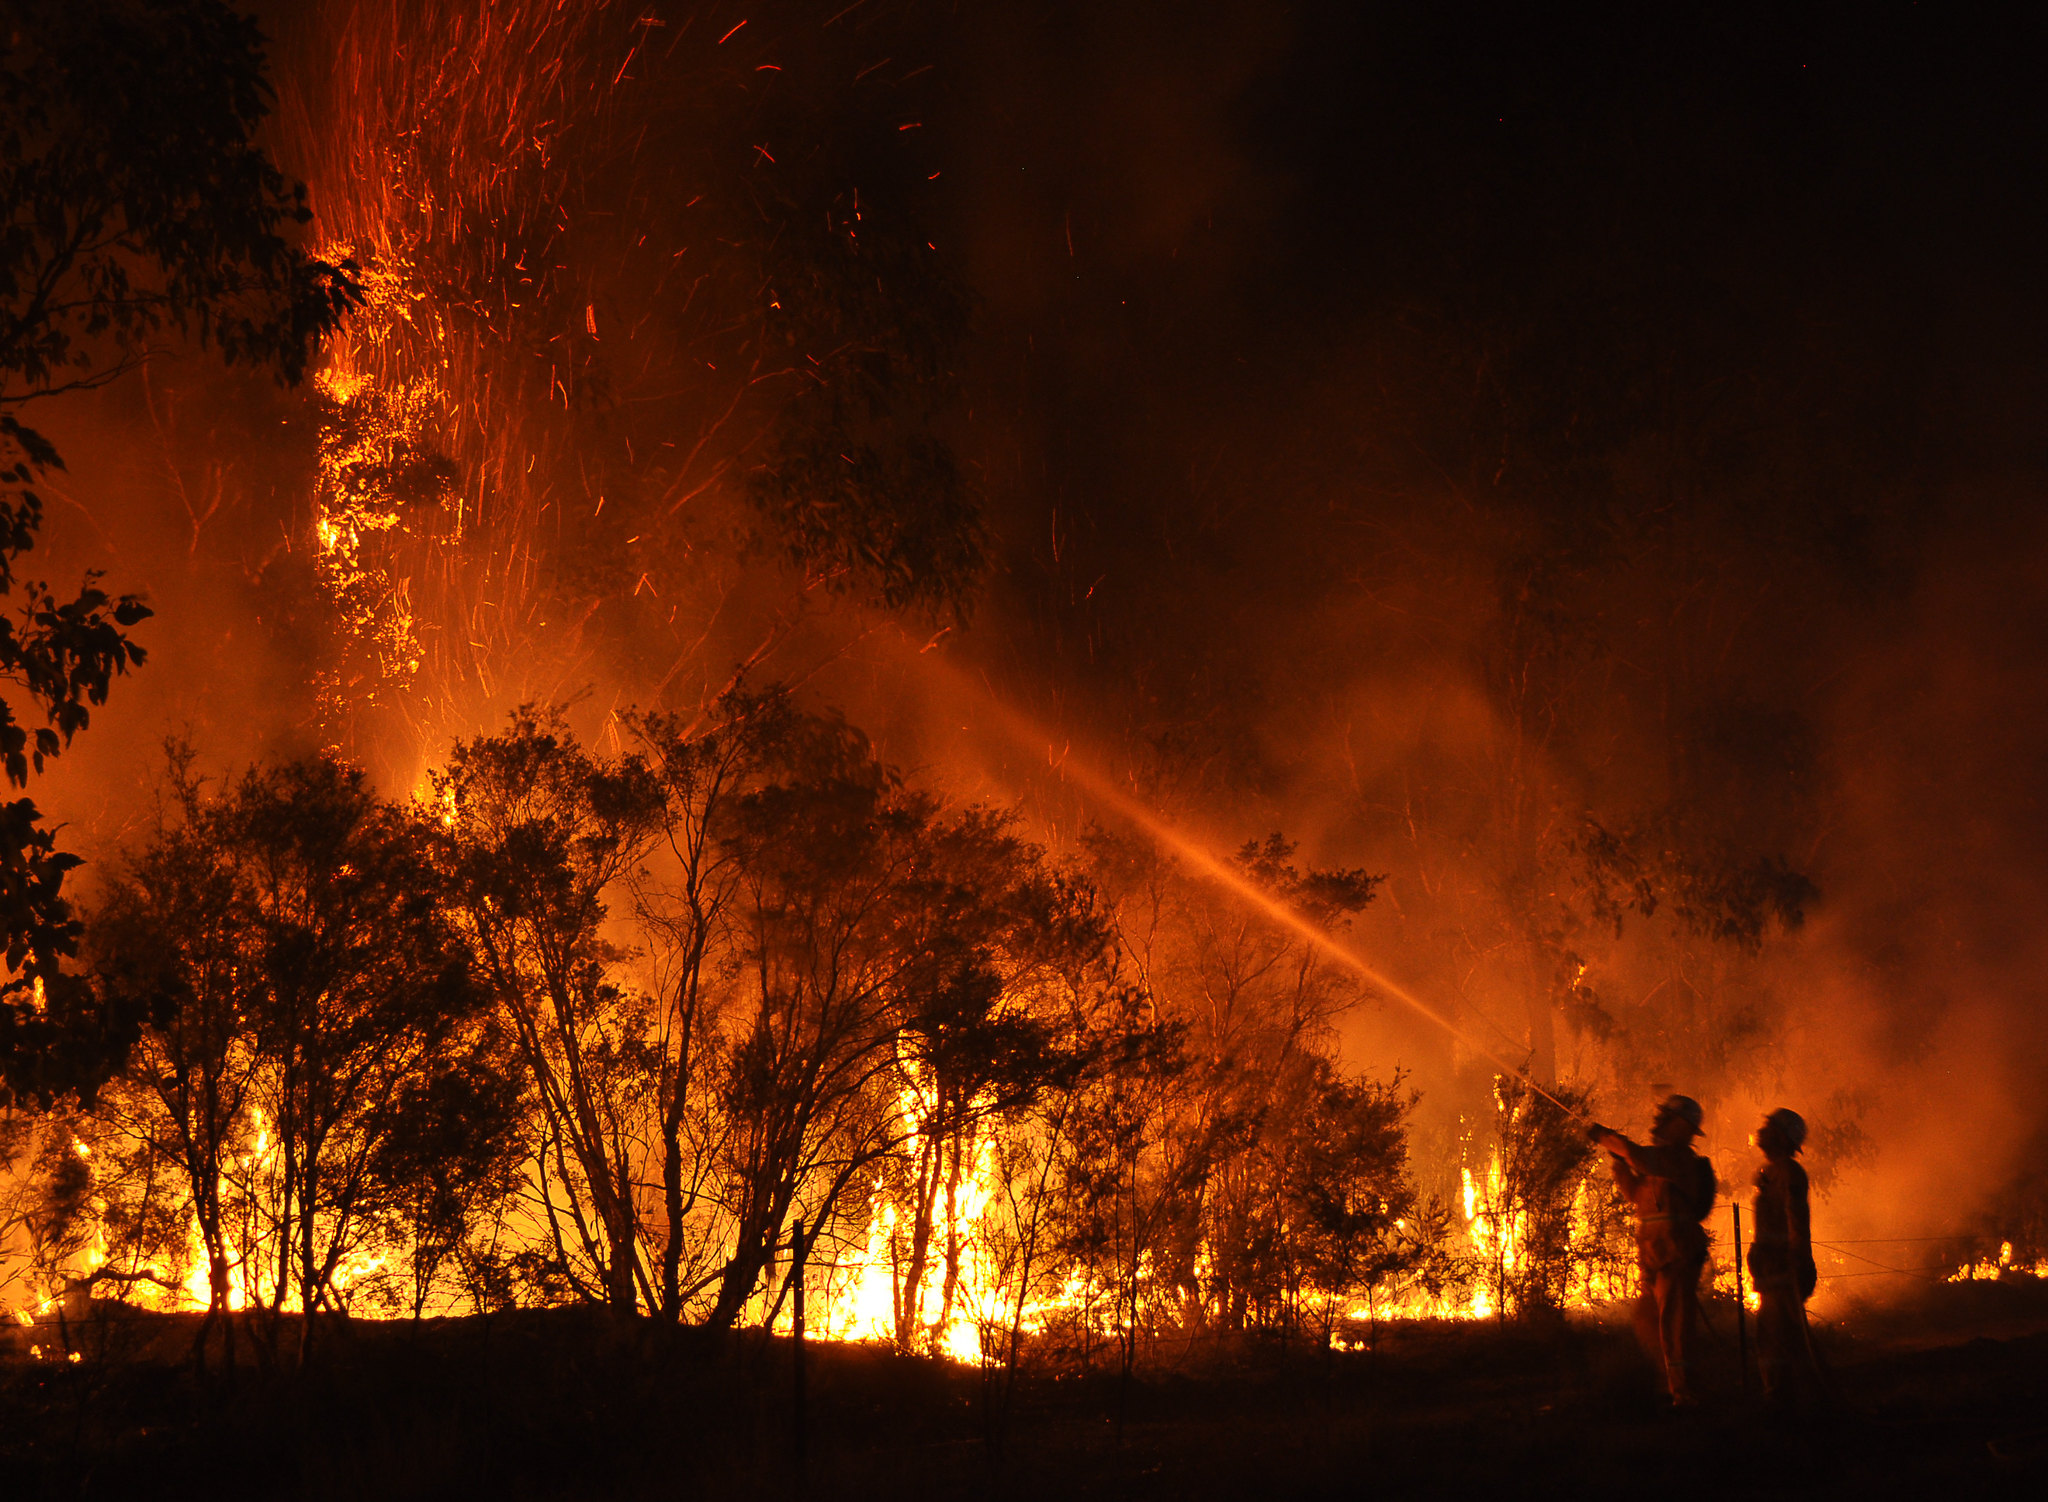 Blazing wildfire burns against a night sky as firefighters spray water on the flames